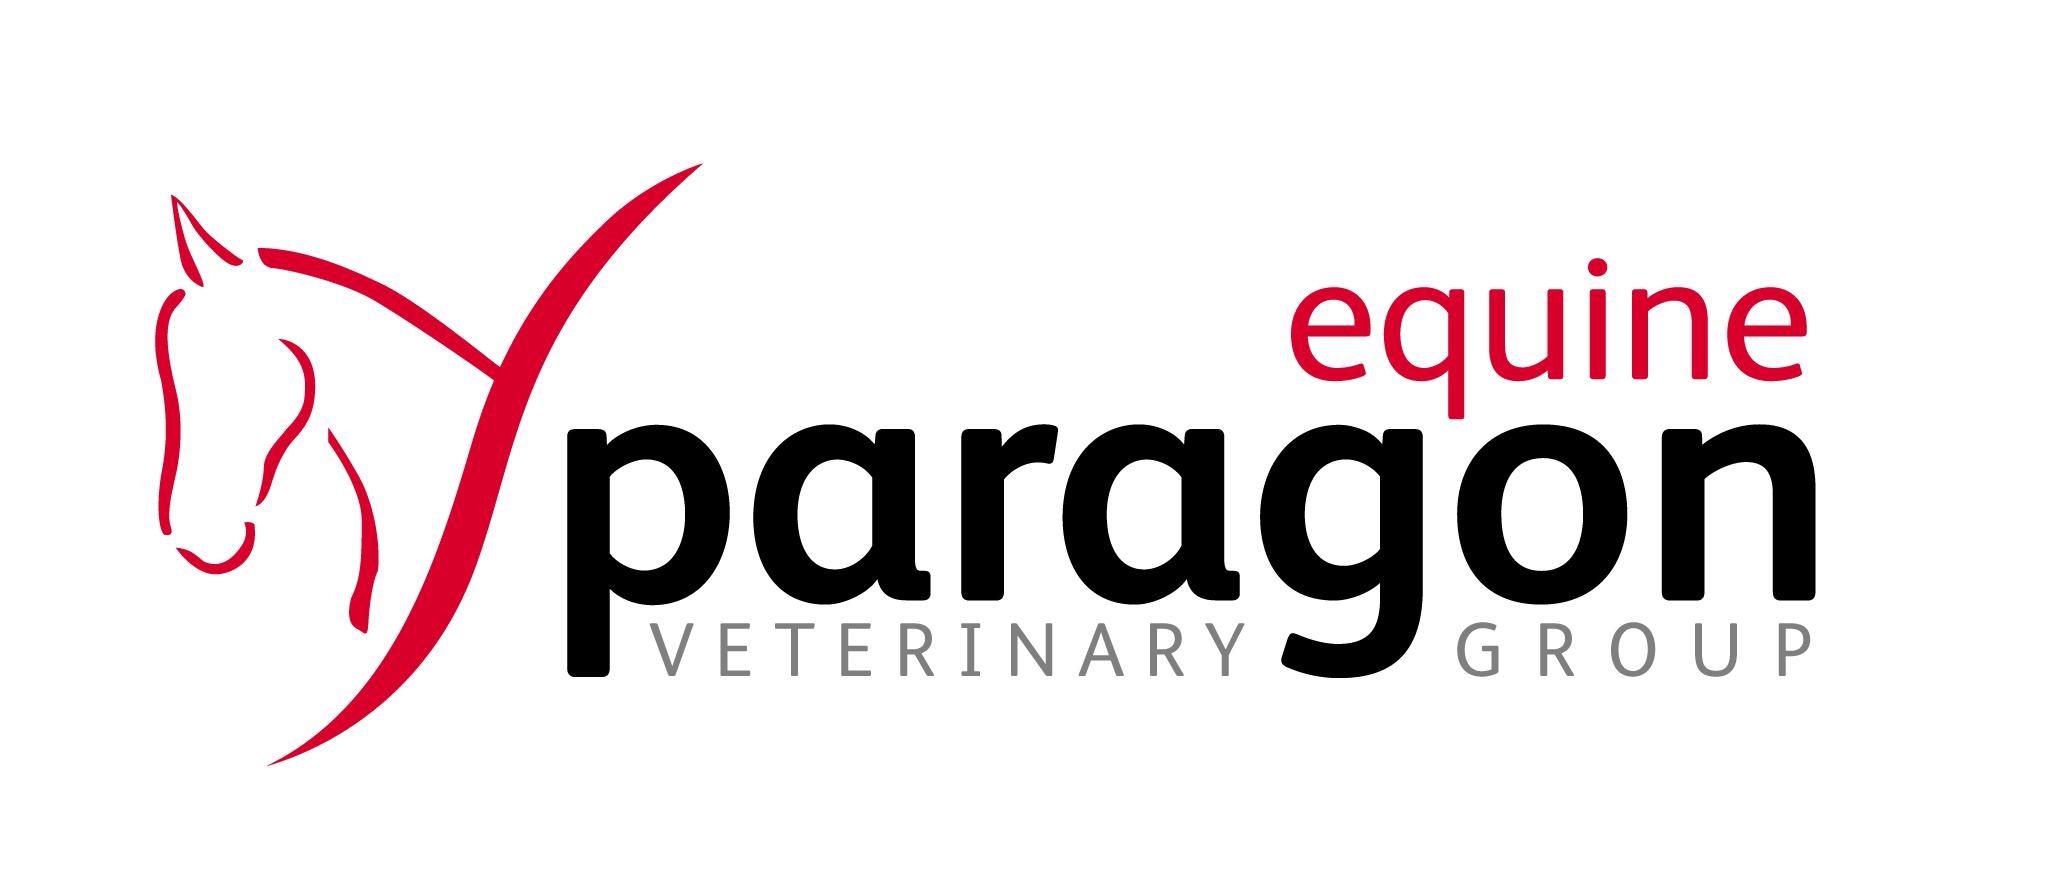 Paragon Veterinary Group - Equine